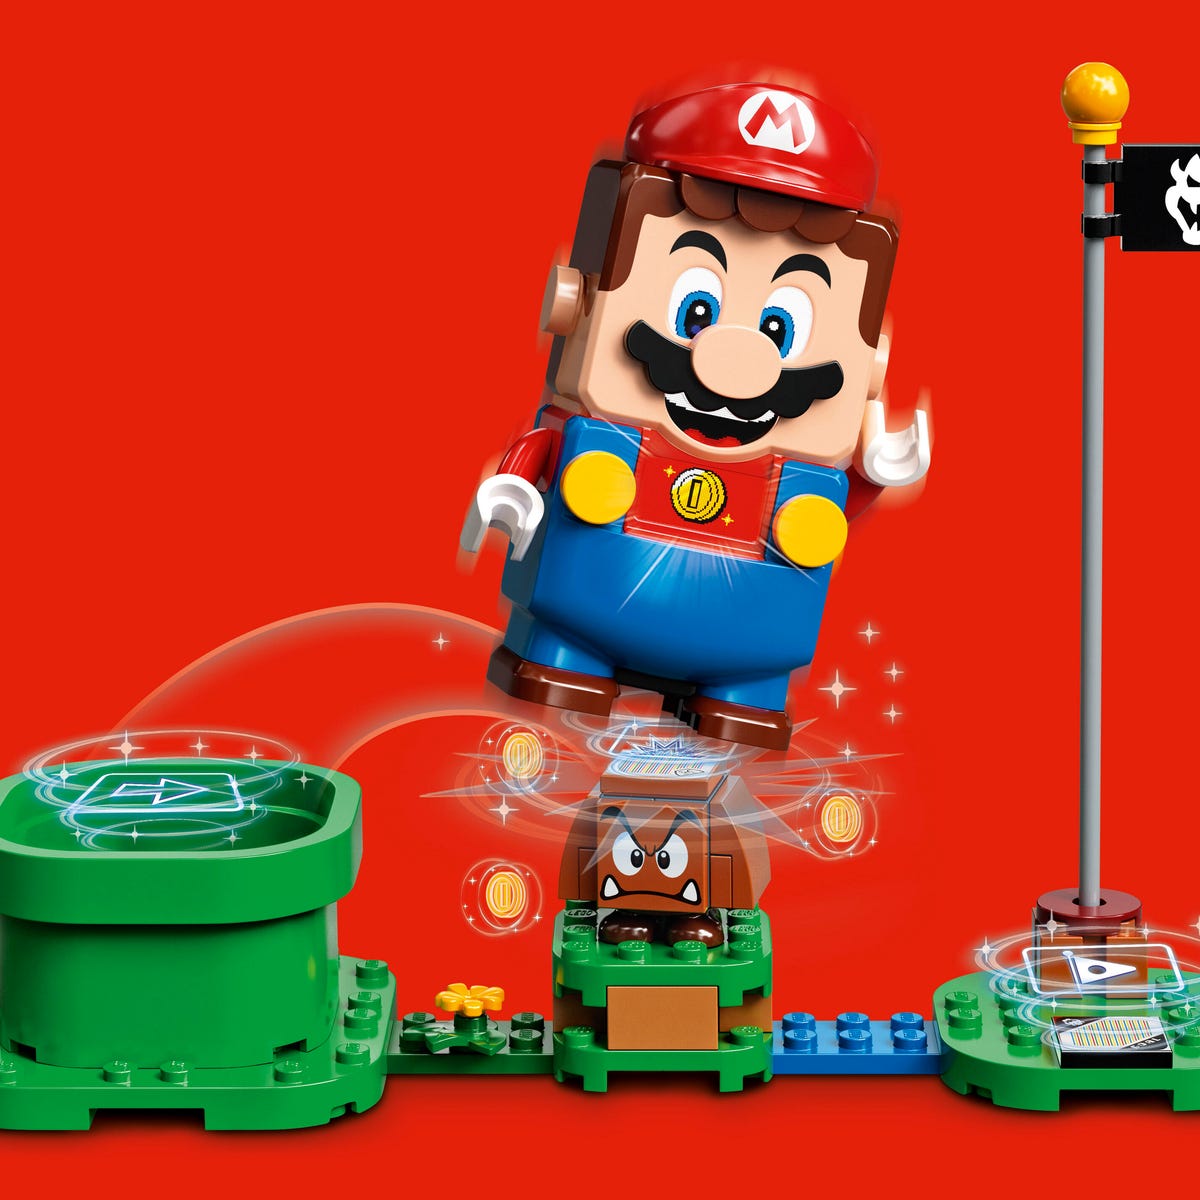 Lego Super Mario looks like a brick-building video game come to life - CNET